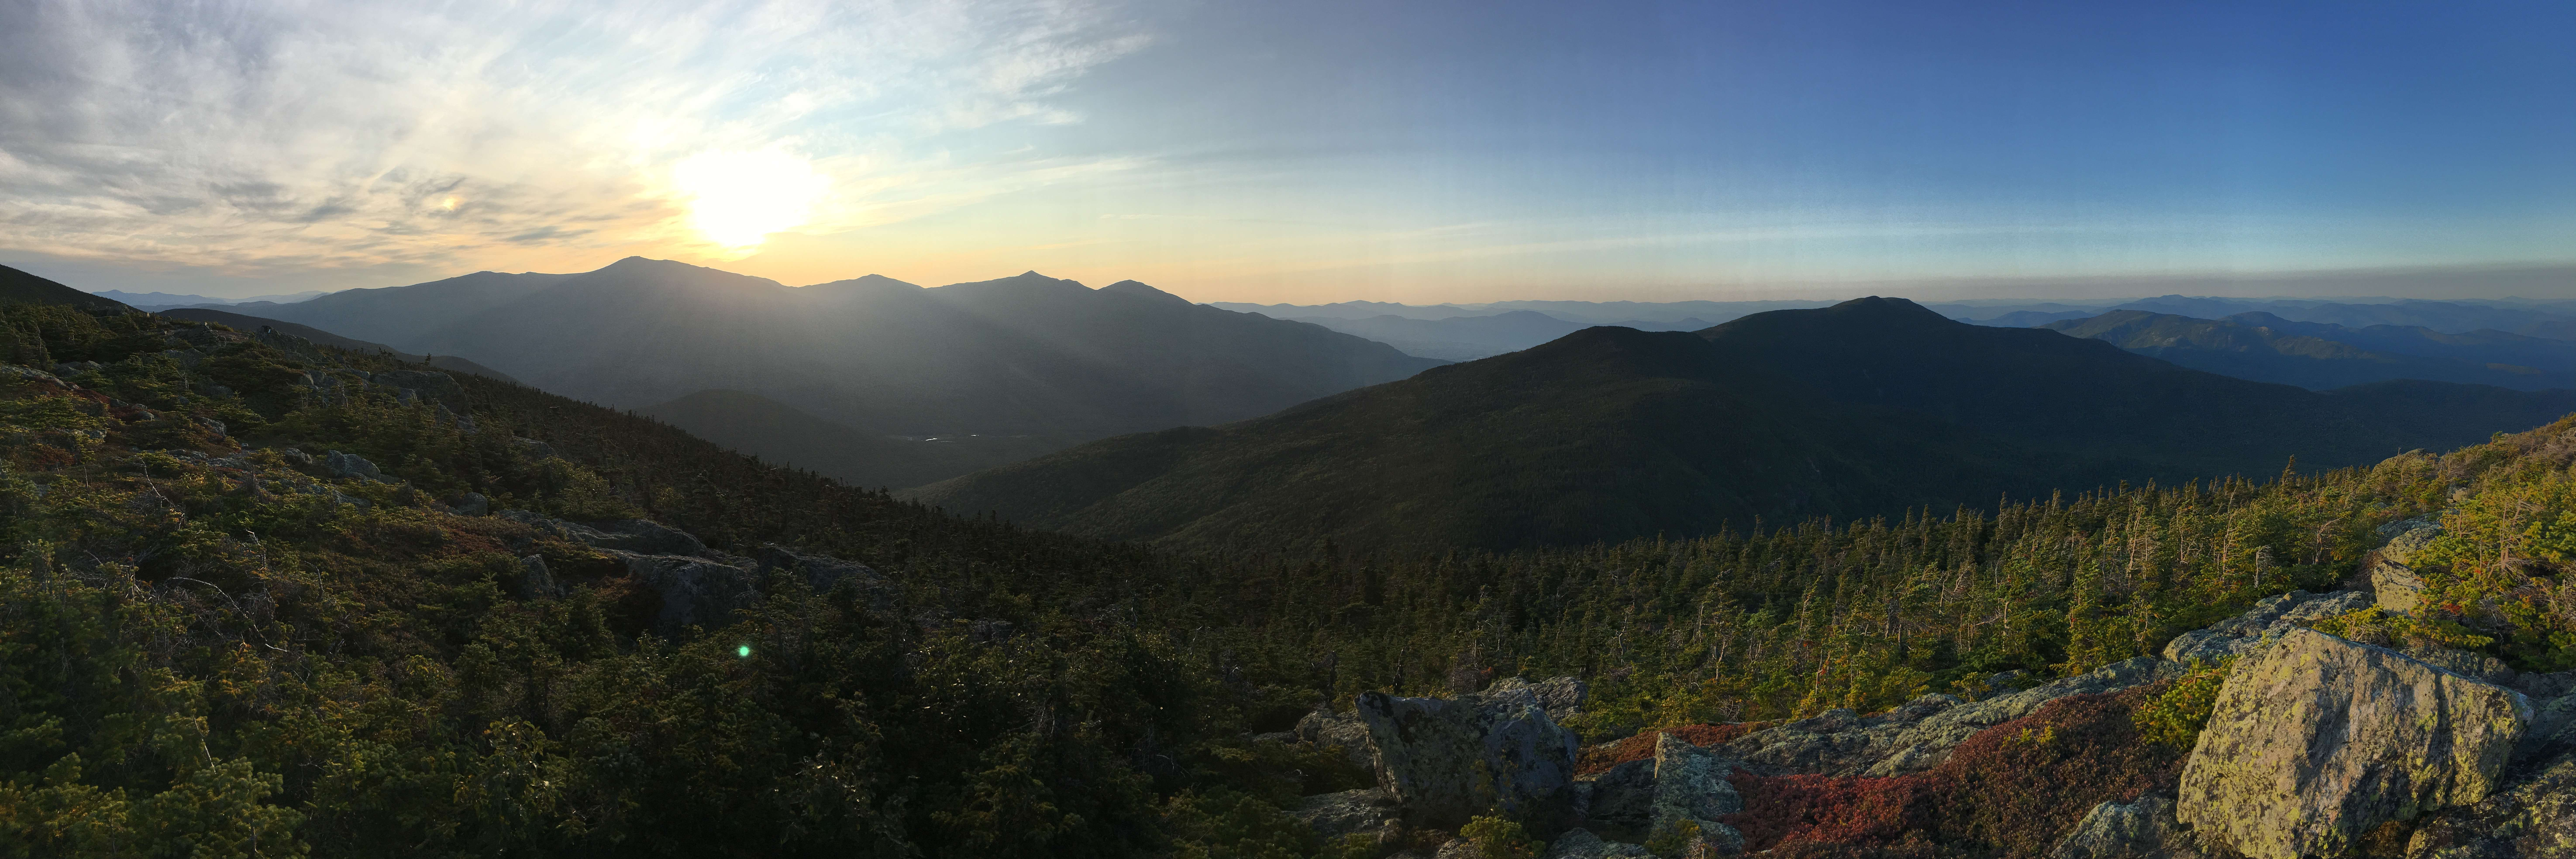 Guided Hiking Trips for New Hampshire's White Mountains